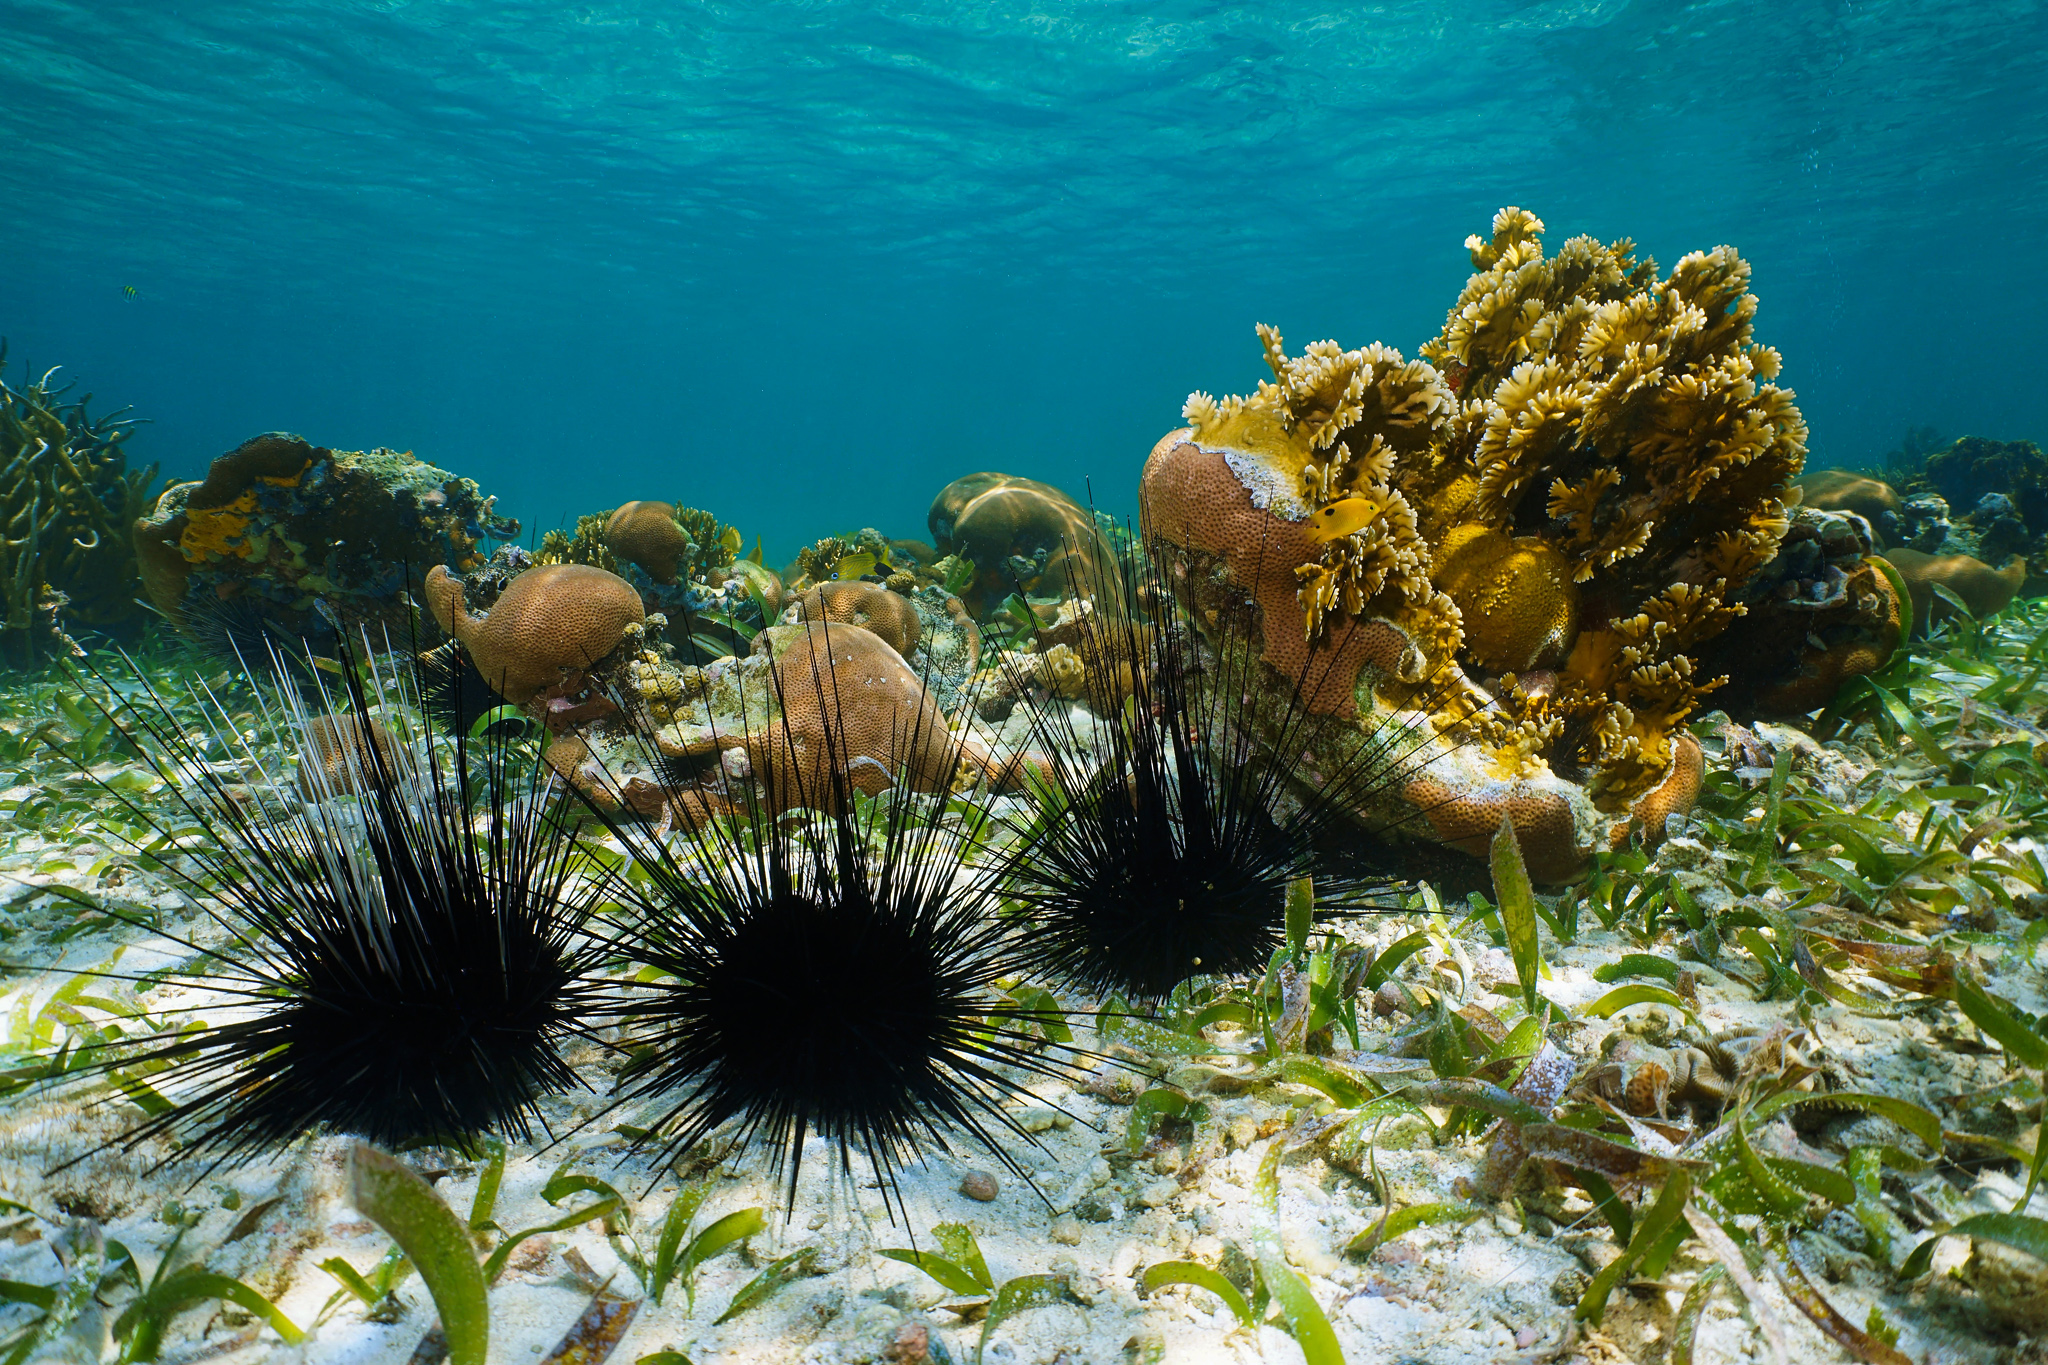 Picture of a long spined sea urchins underwater on seabed of the Caribbean sea